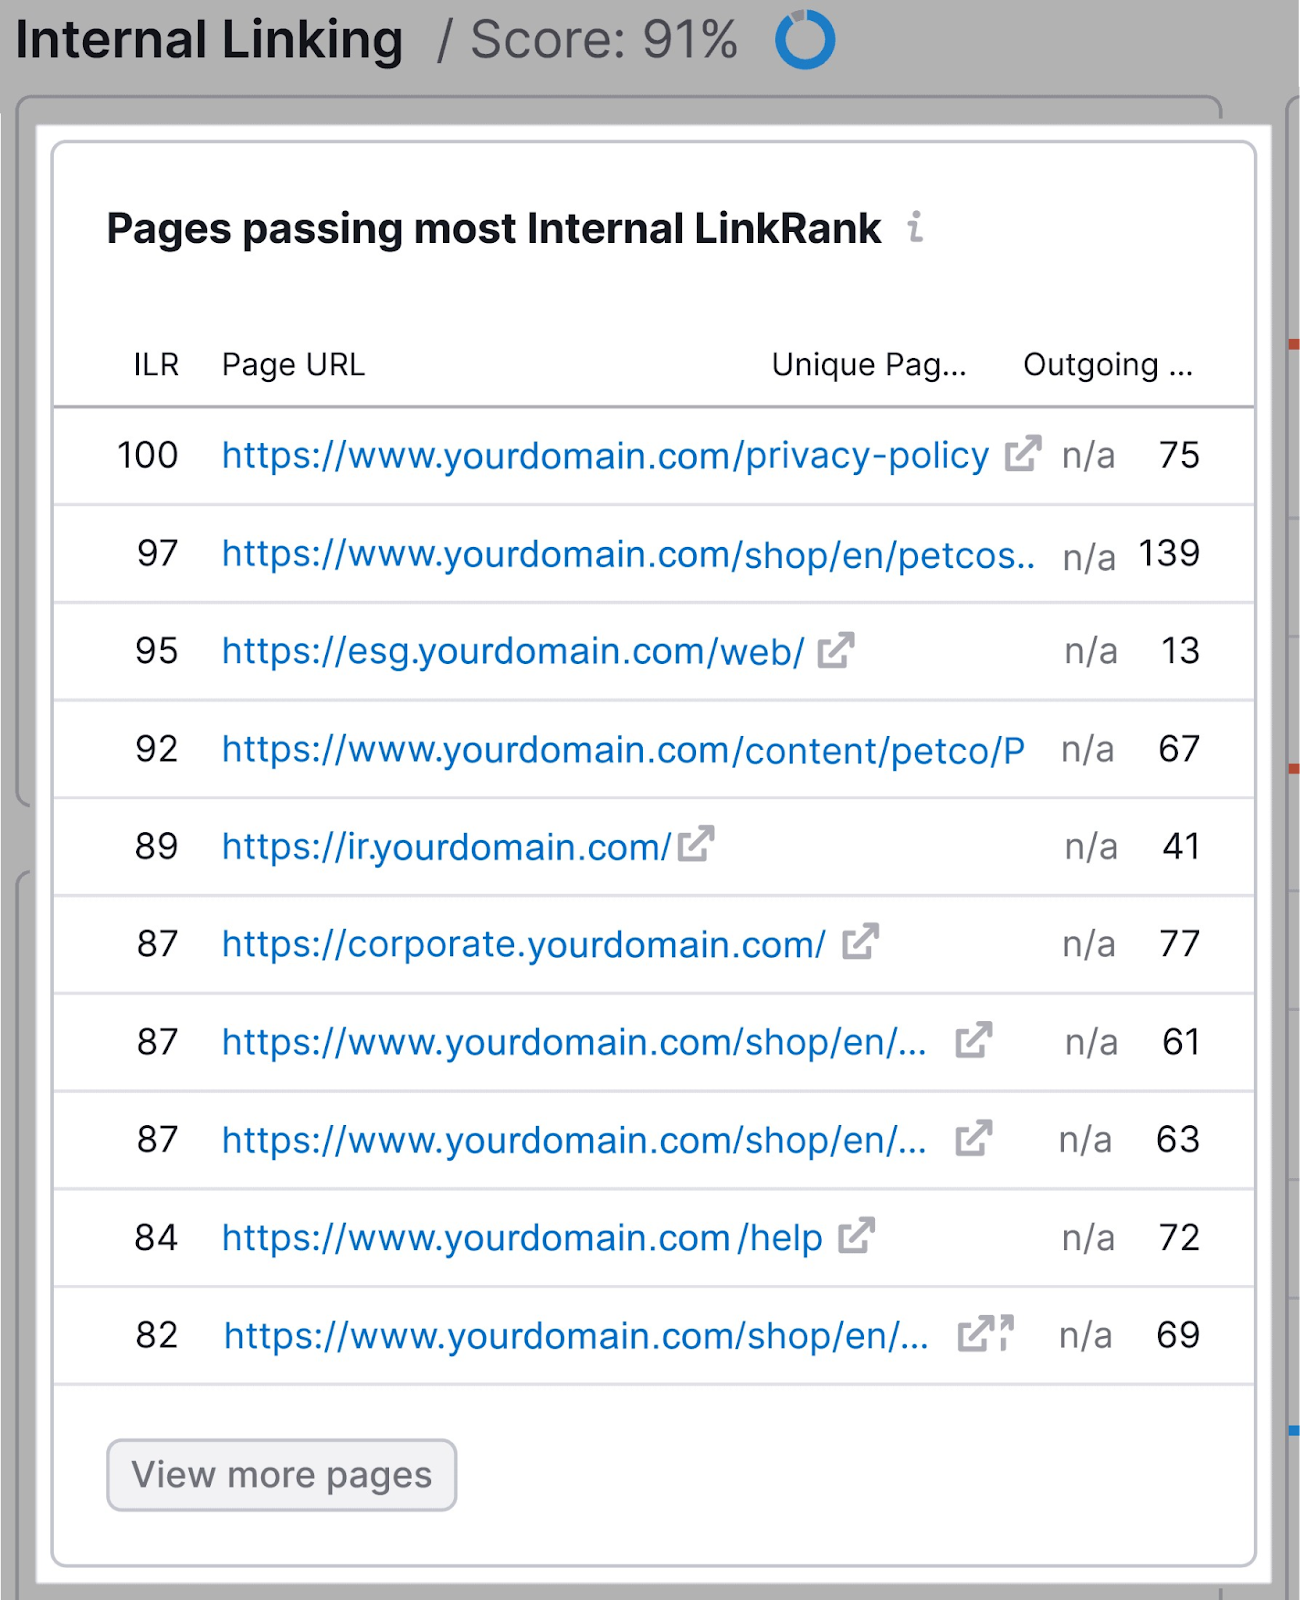 Pages Passing Most Internal LinkRank section